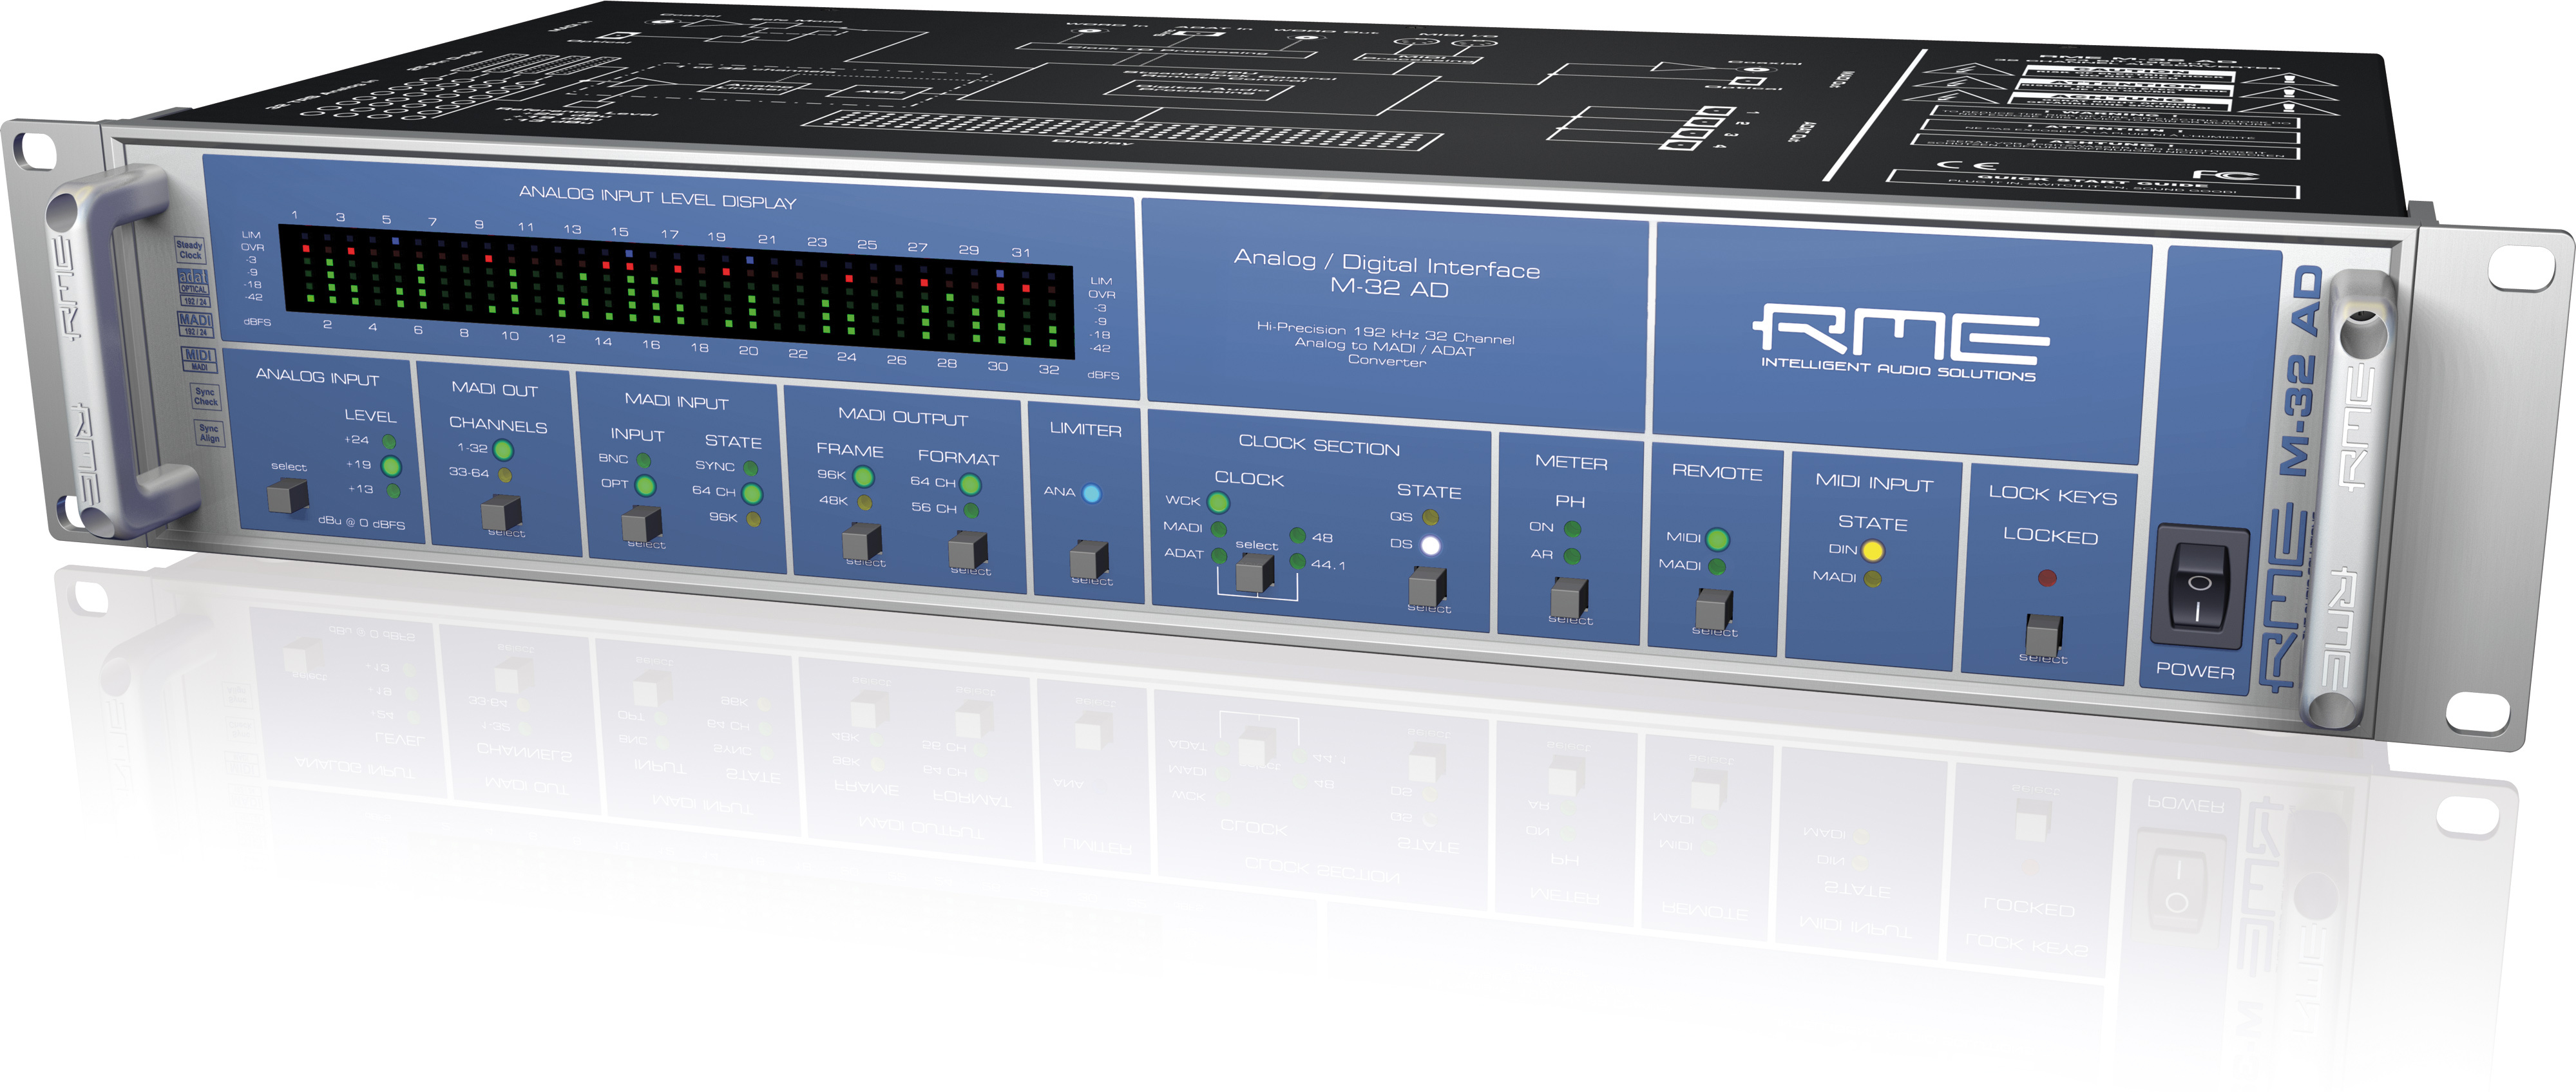 Rme M-32-ad - Converter - Main picture